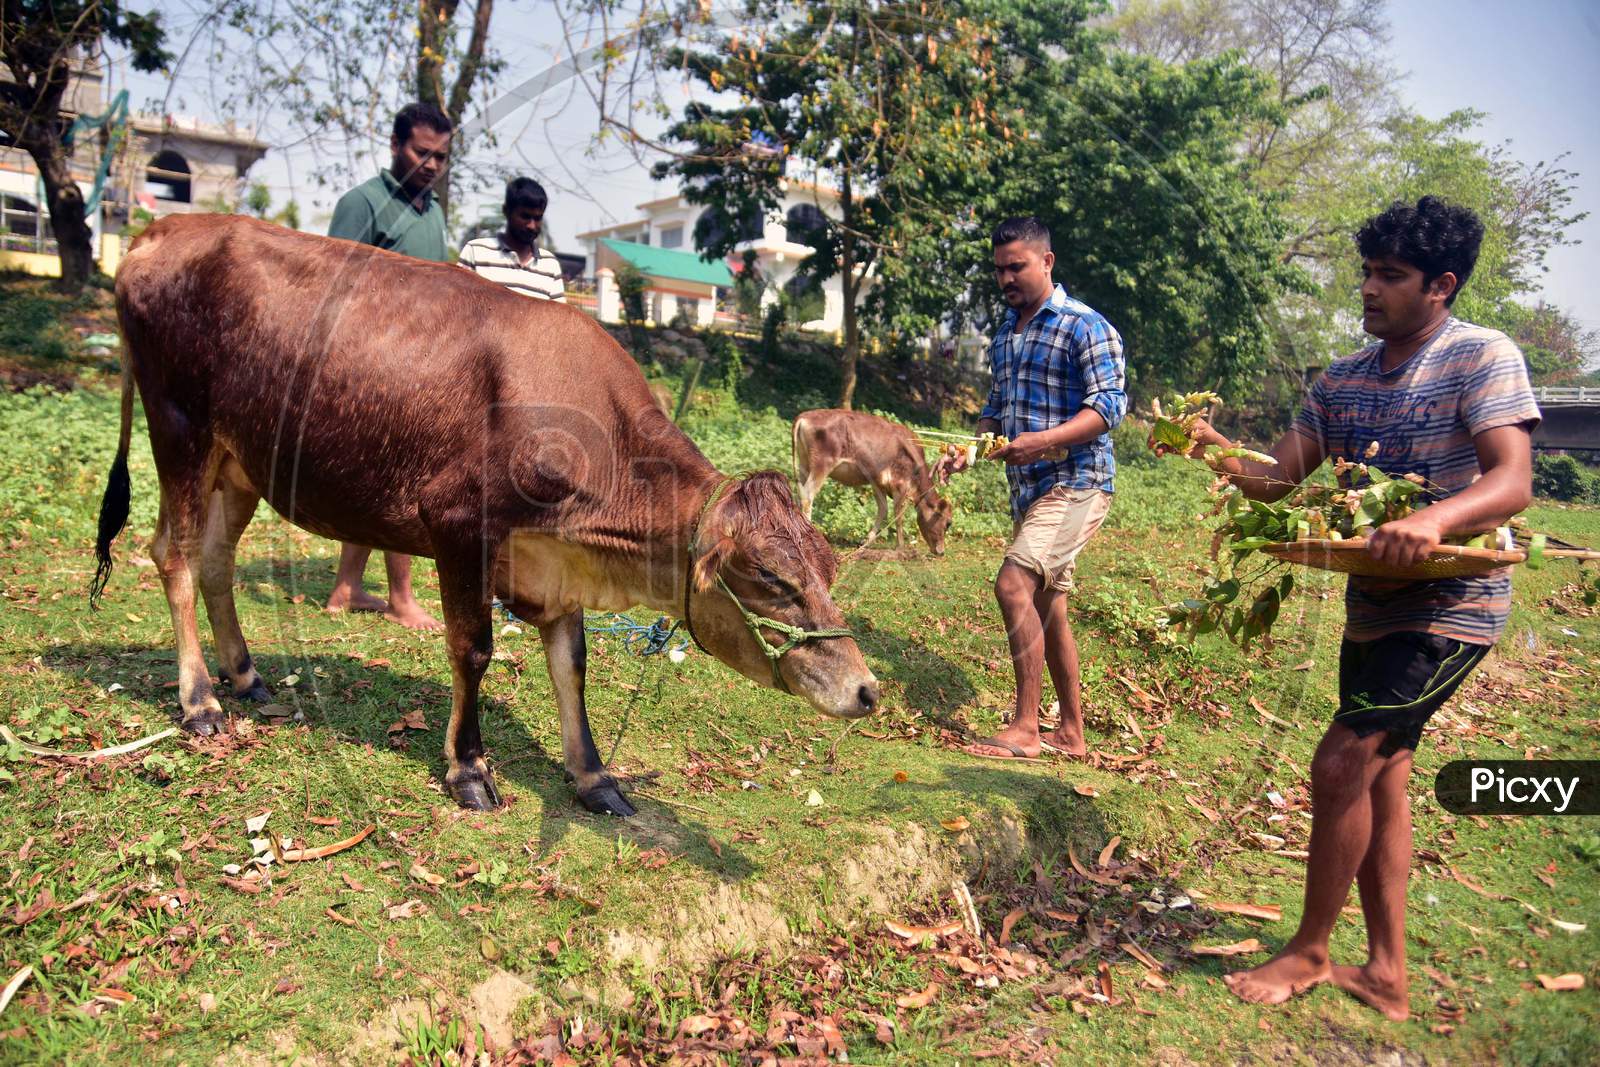 People Feed a Cow During First Day of Bihu, Also Known as Goru Bihu or Cow Bihu in Nagaon District of Assam on April 13, 2020